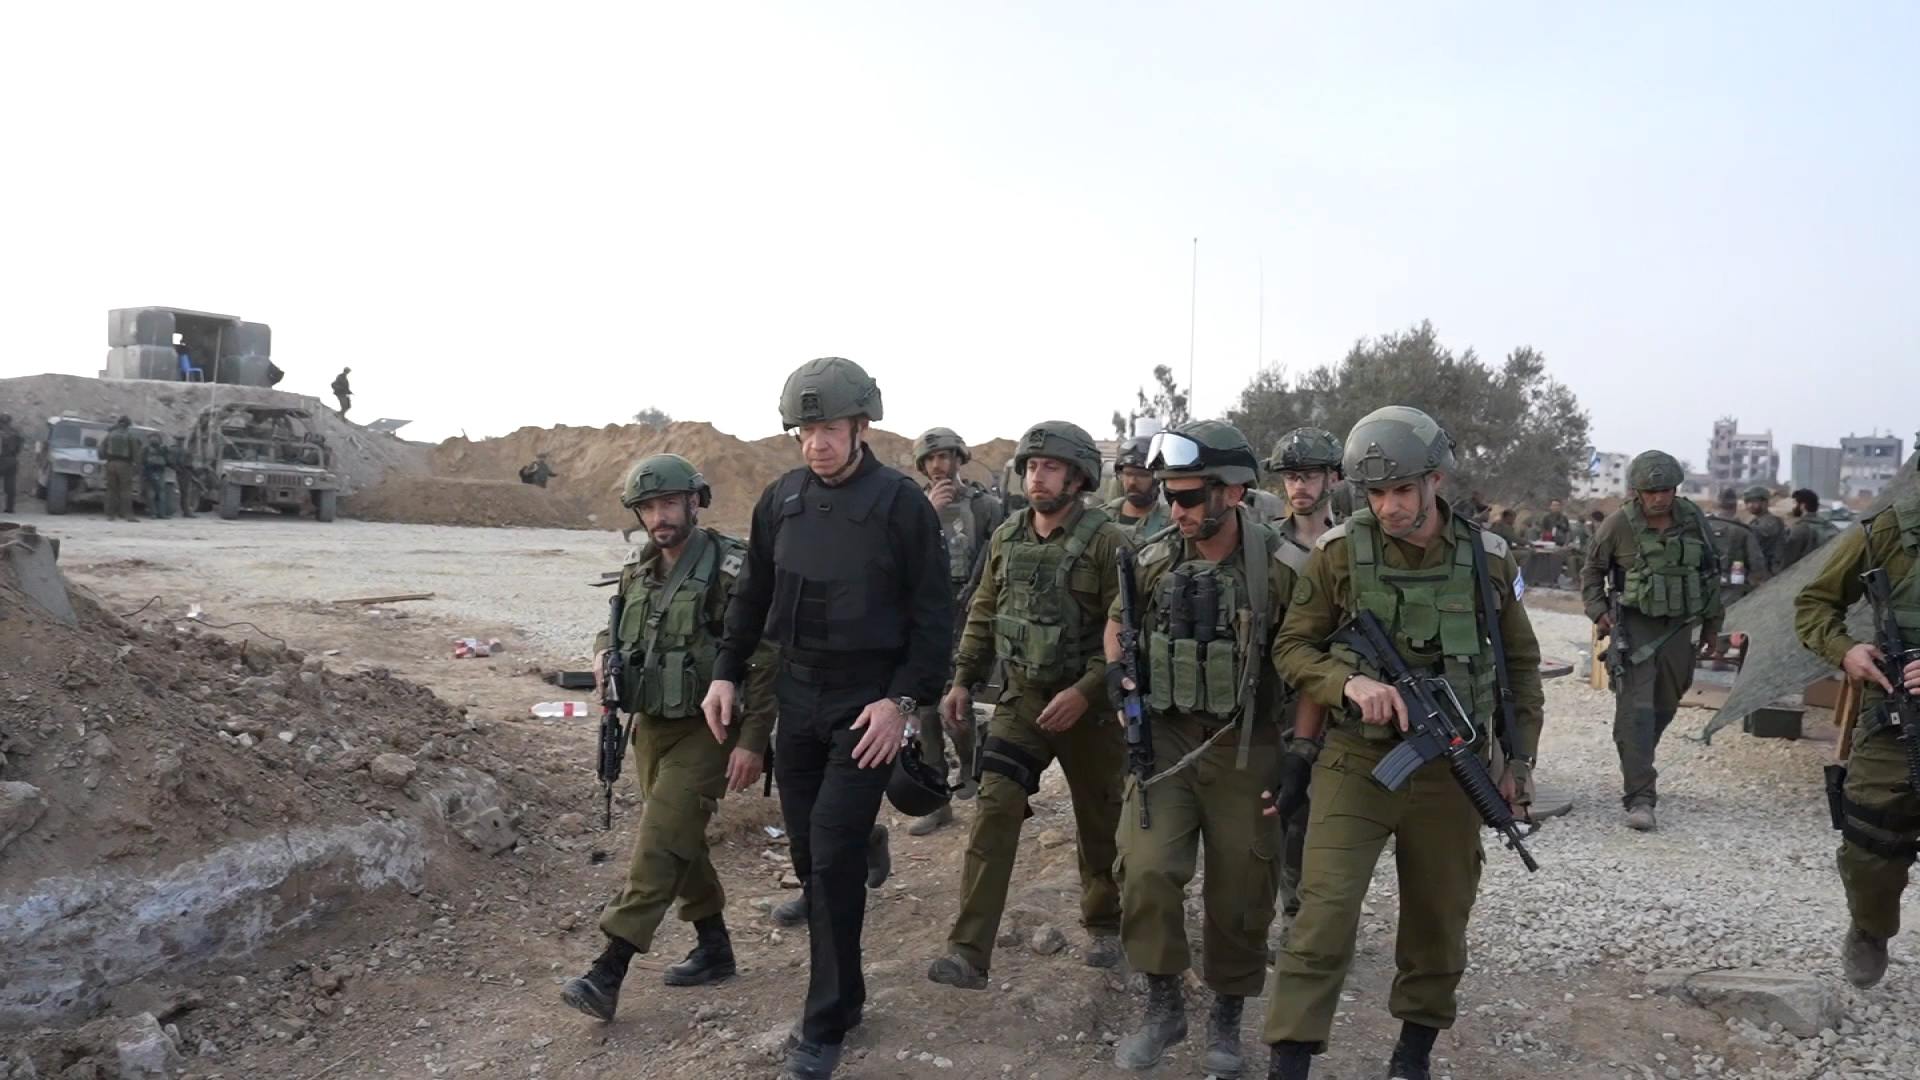 Israel Minister of Defense Yoav Gallant, second from left, is pictured in Gaza.